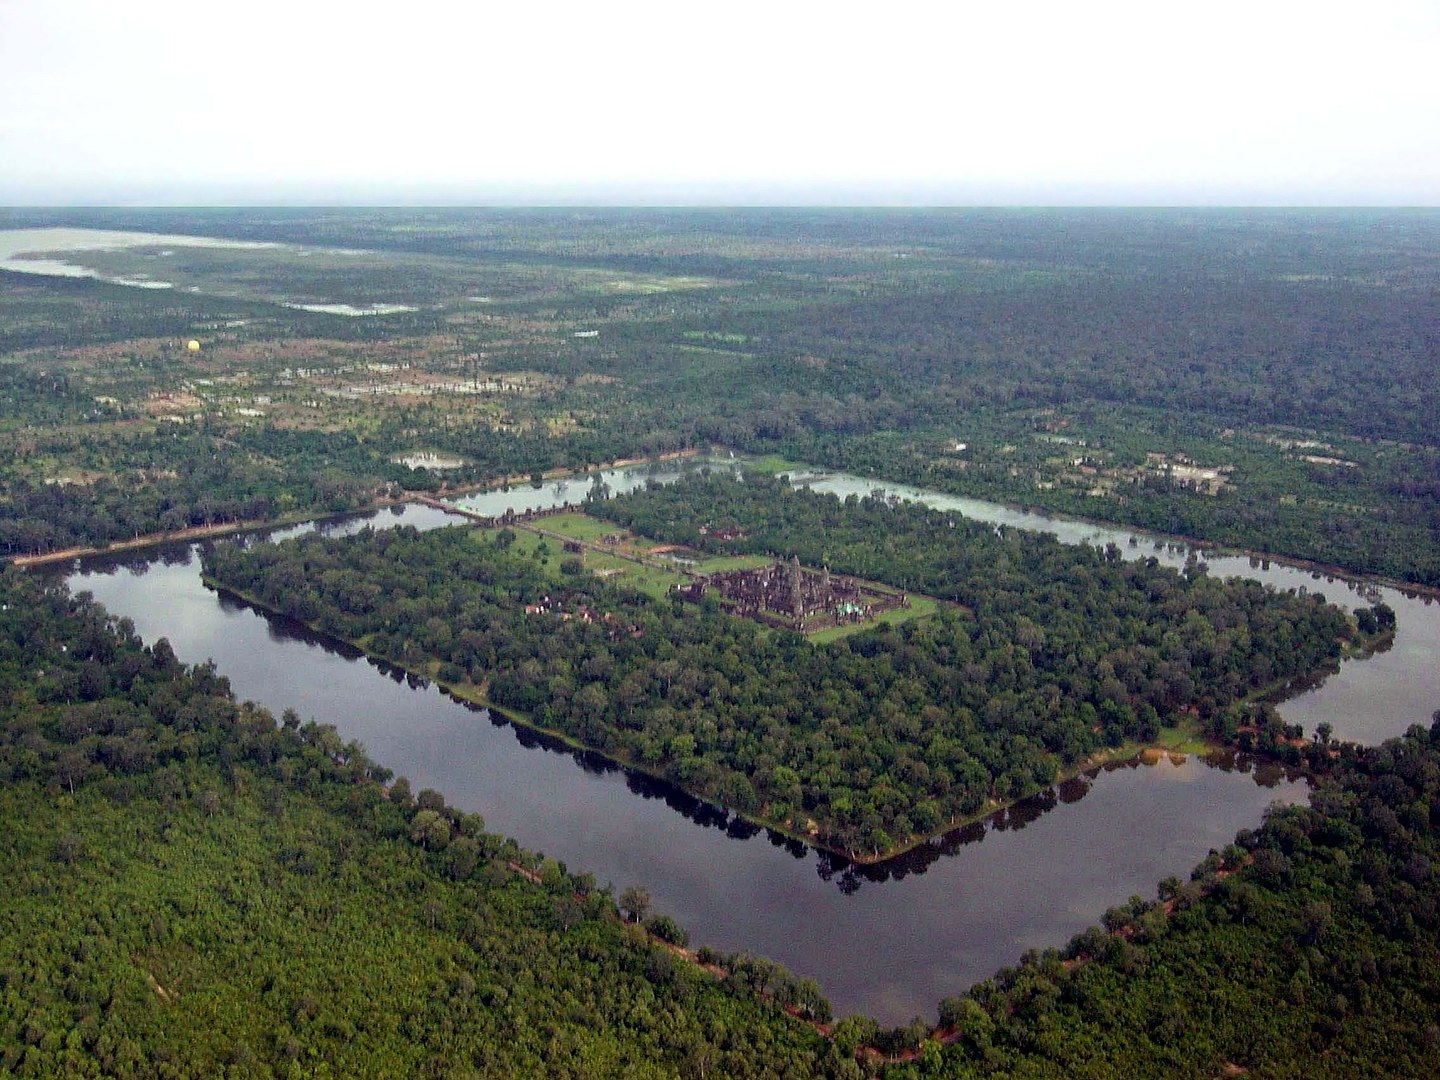 By Charles J Sharp - Taken from helicopter flying over Angkor Wat, CC BY 2.5-Angkor-Wat-from-the-air